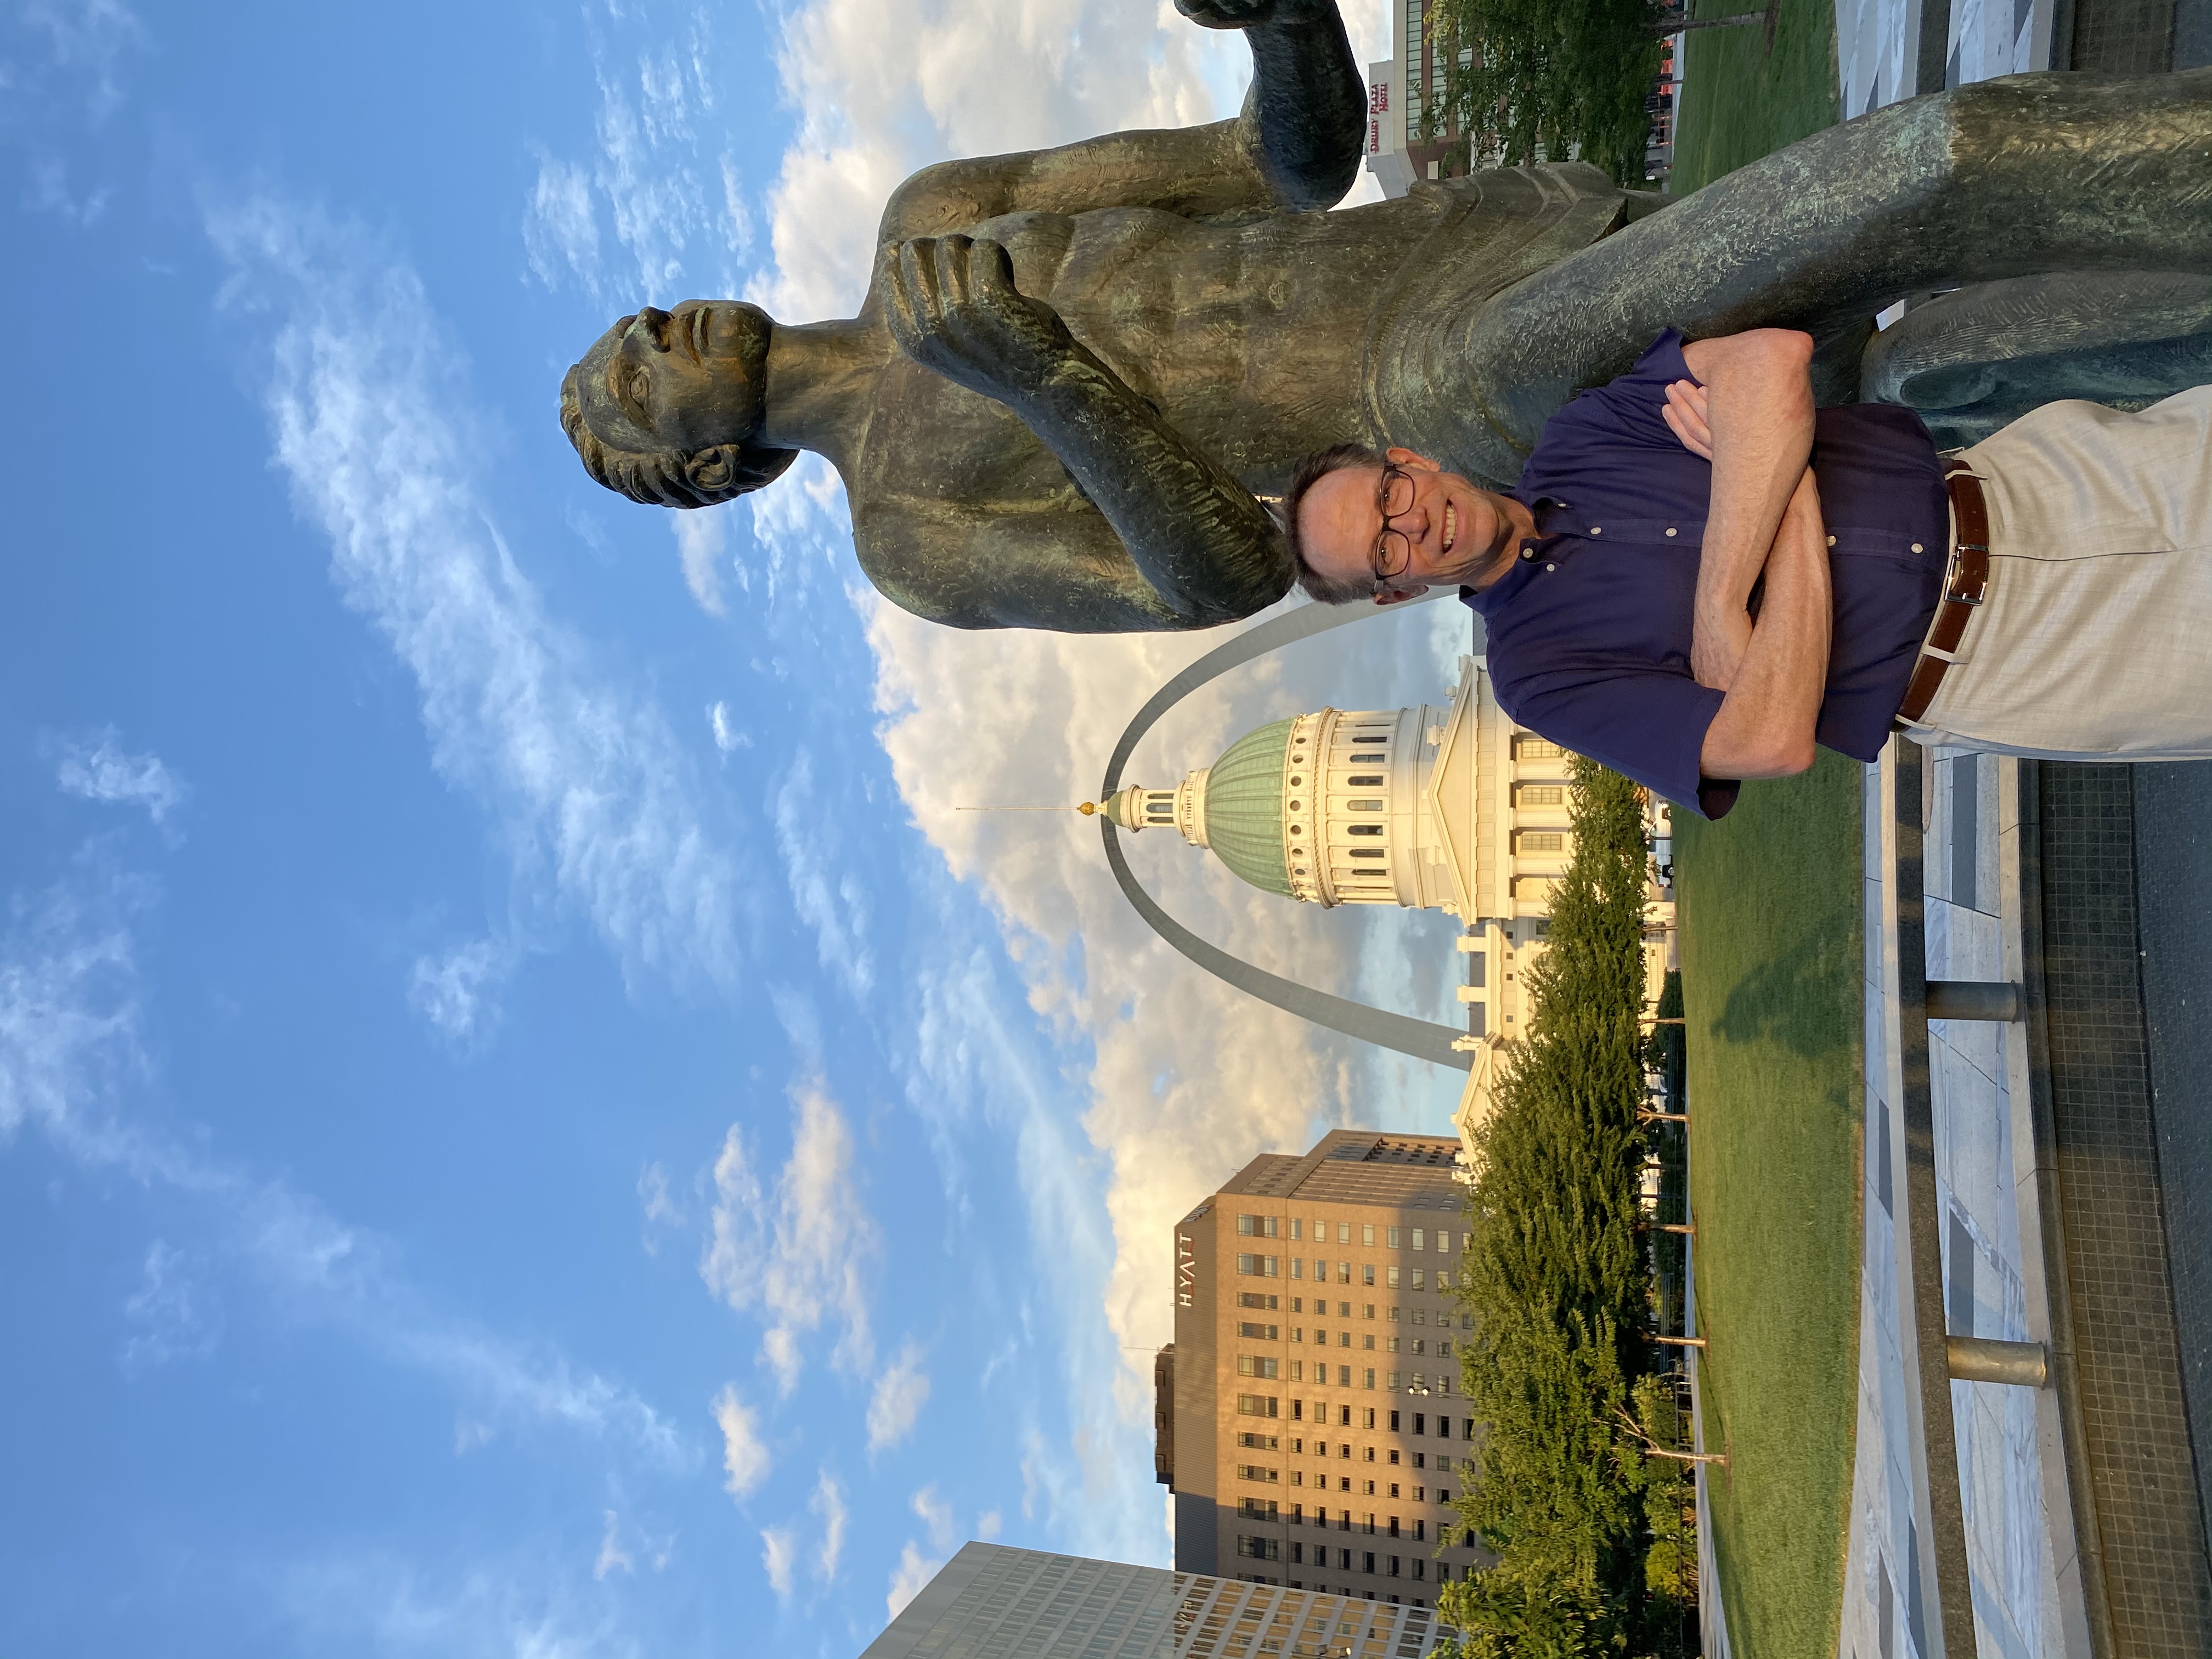 Image of Charlie Brennan standing next to the Running Man statue with the St. Louis Arch and the Old Courthouse in the background.